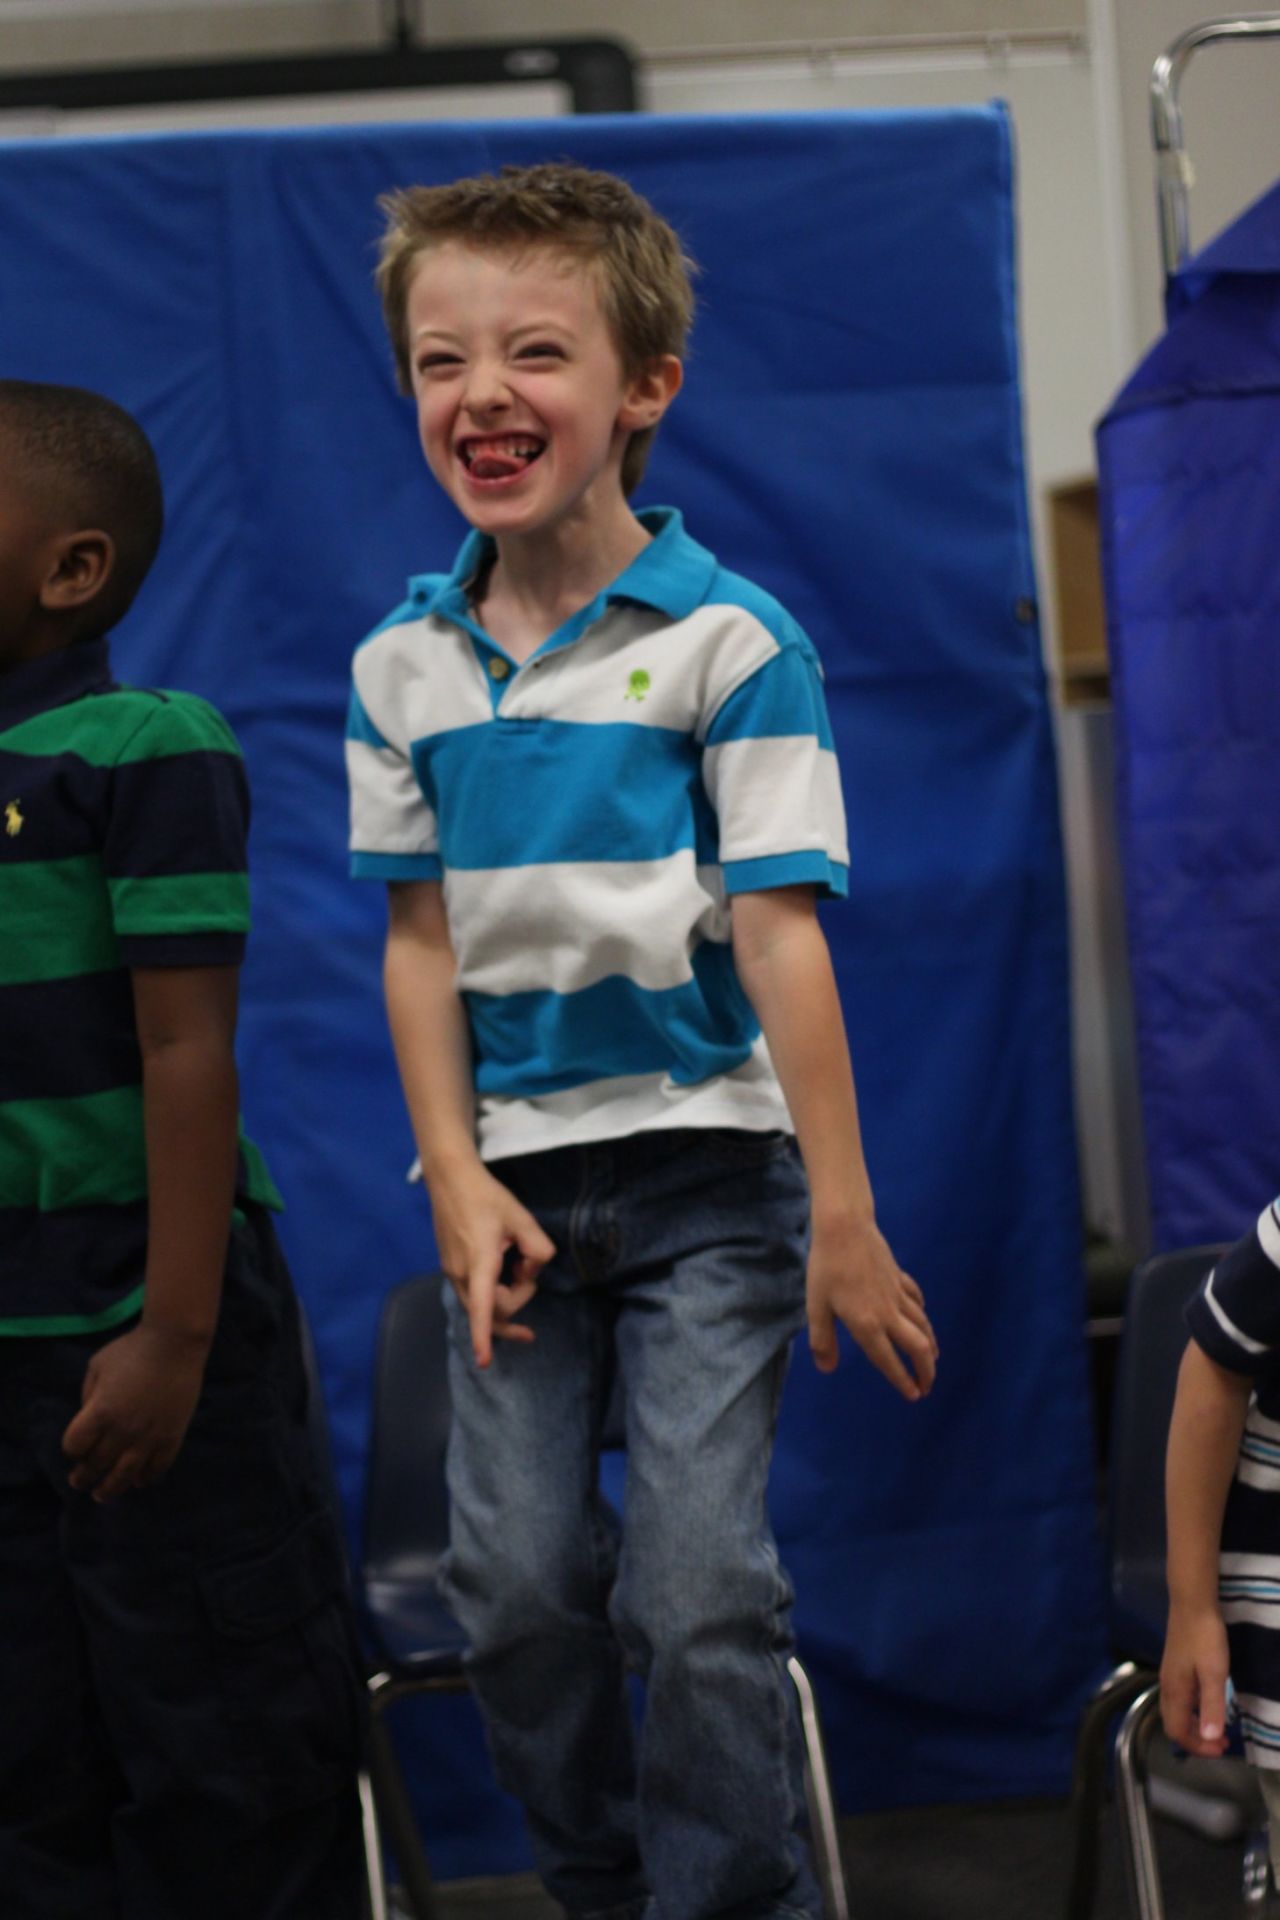 <a href="http://ireport.cnn.com/docs/DOC-984449">Marshall Griffin</a> received the "Best Reader" award at his graduation from D.P. Morris Elementary in Arlington, Texas. Part of their graduation ceremony was performing songs for the parents. In this picture, he is hopping up and down, singing one of the songs. Many of the children in his class, including Marshall, are on the autism spectrum. "The teacher also gave a little speech about the year she's had with the children, and she cried, making all of us cry," said Marshall's mom, Roni. 